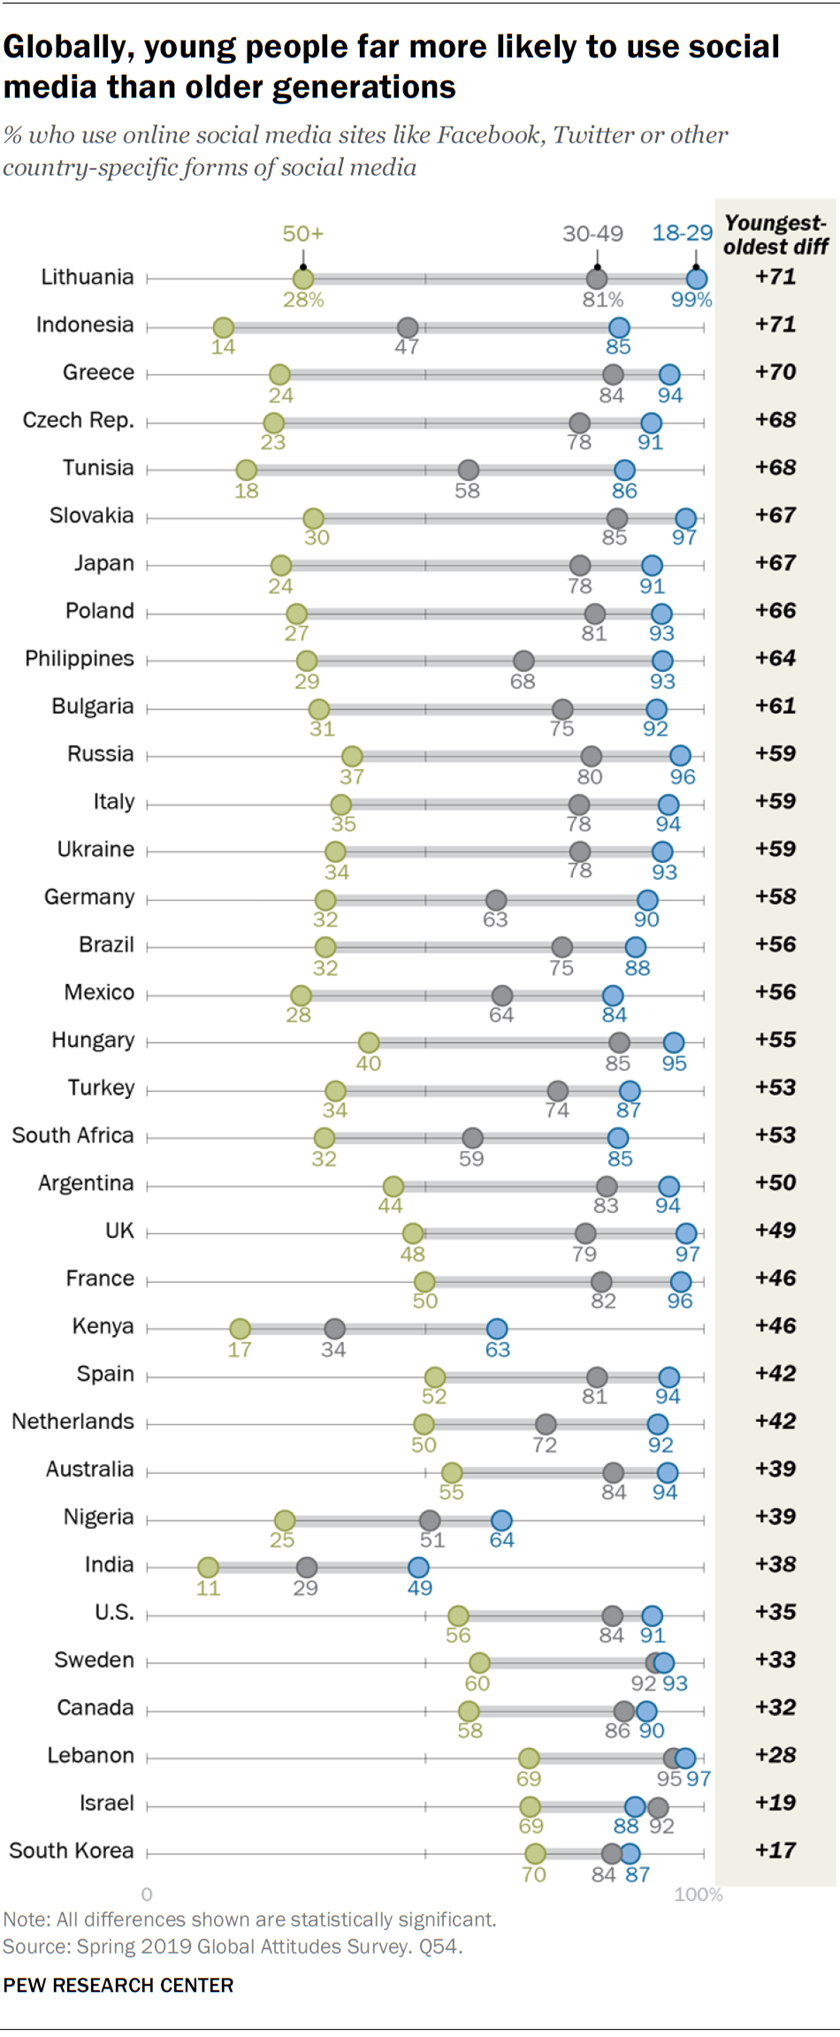 Globally, young people far more likely to use social media than older generations